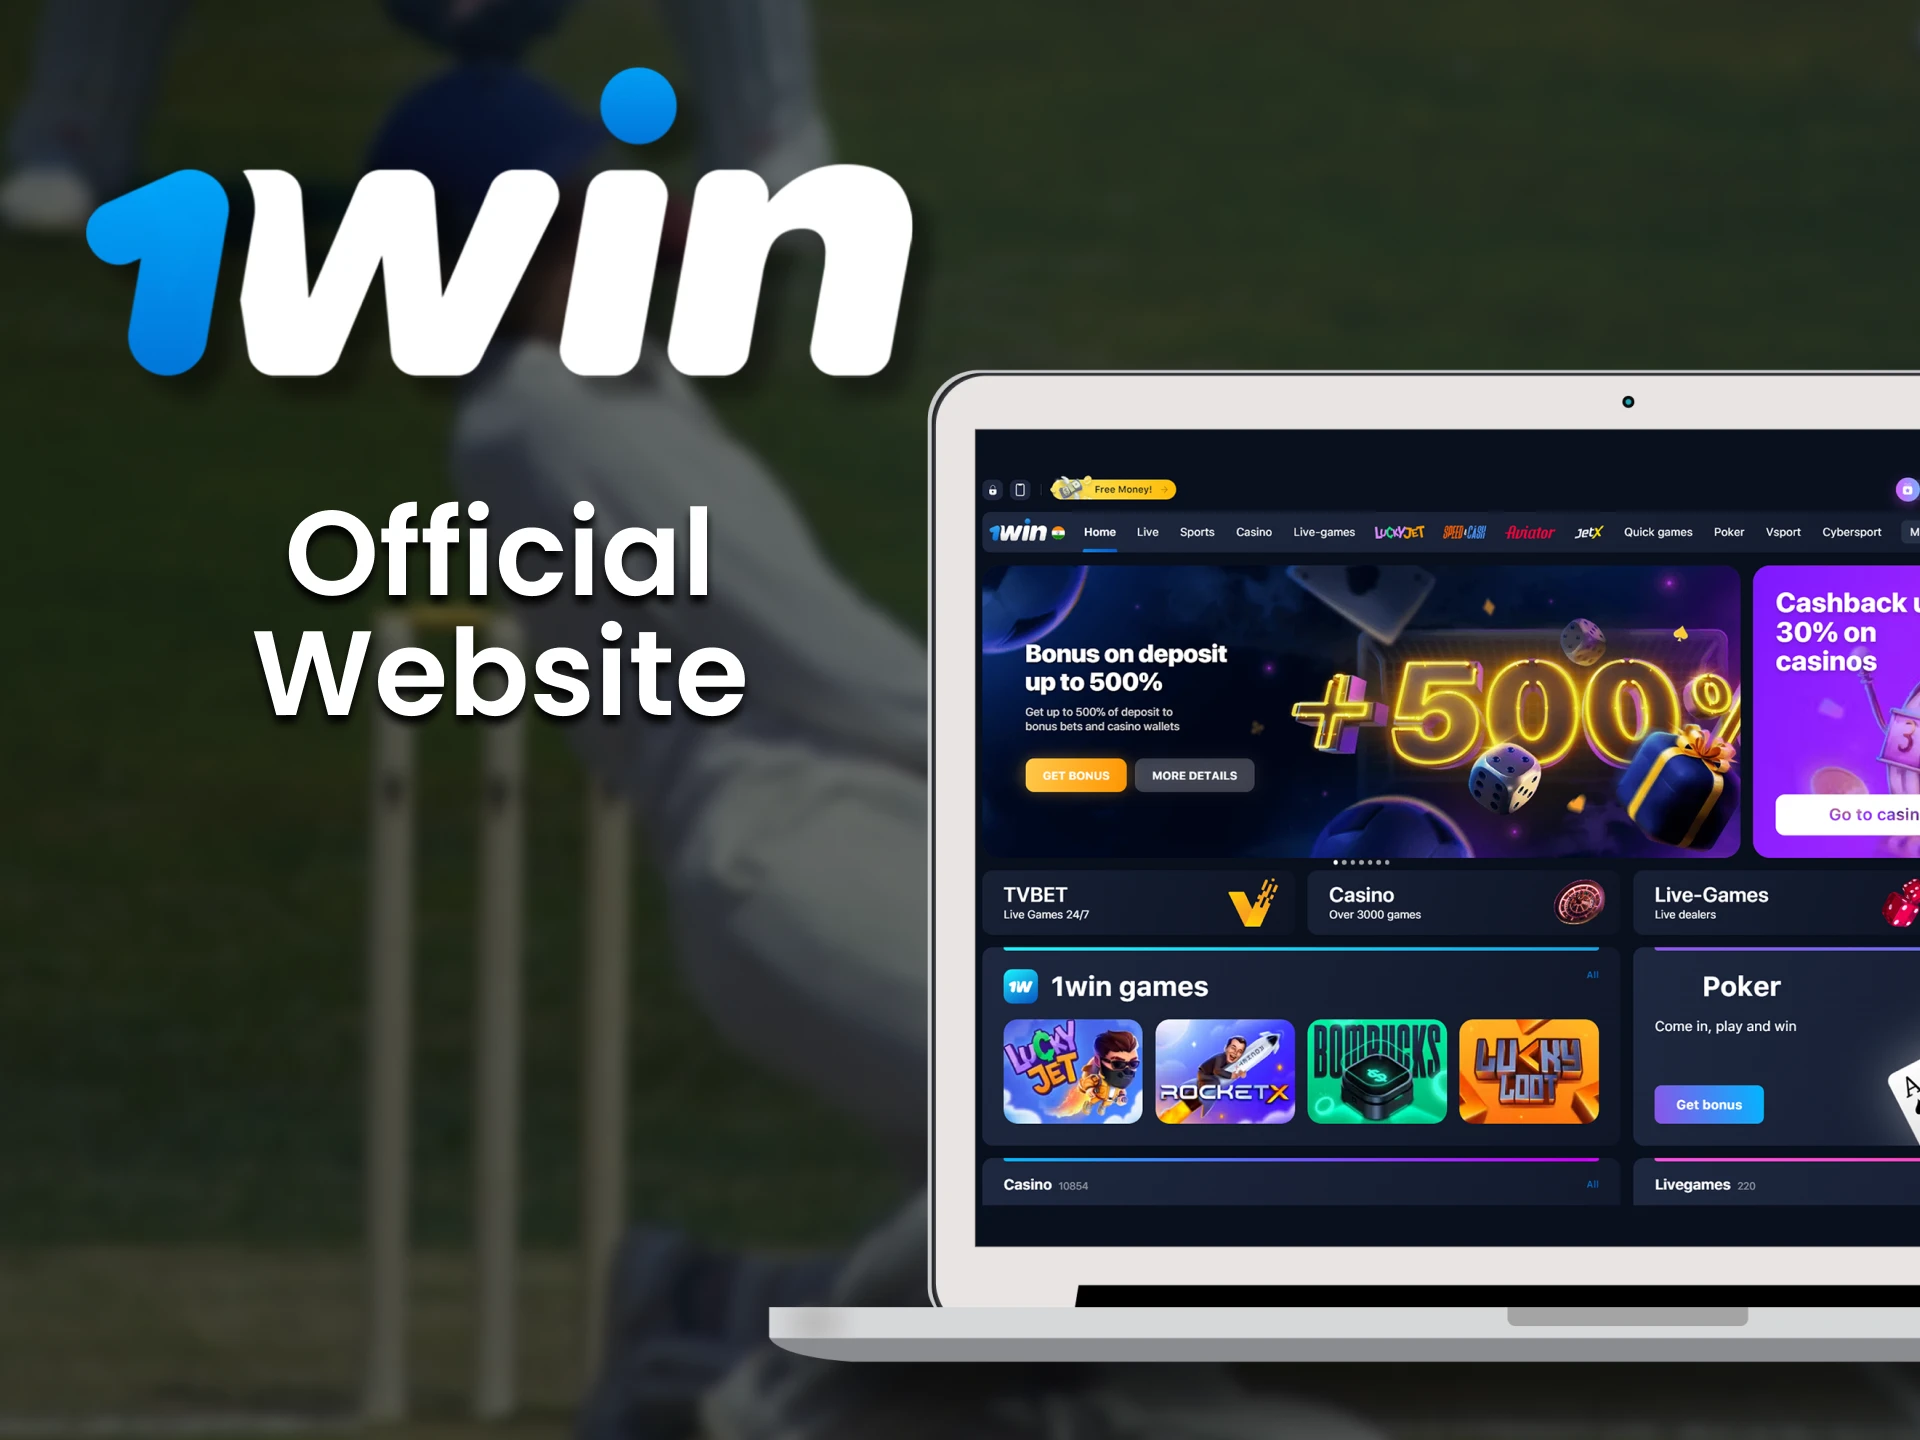 1win has a licensed and user-friendly online website for bettors and casino players.